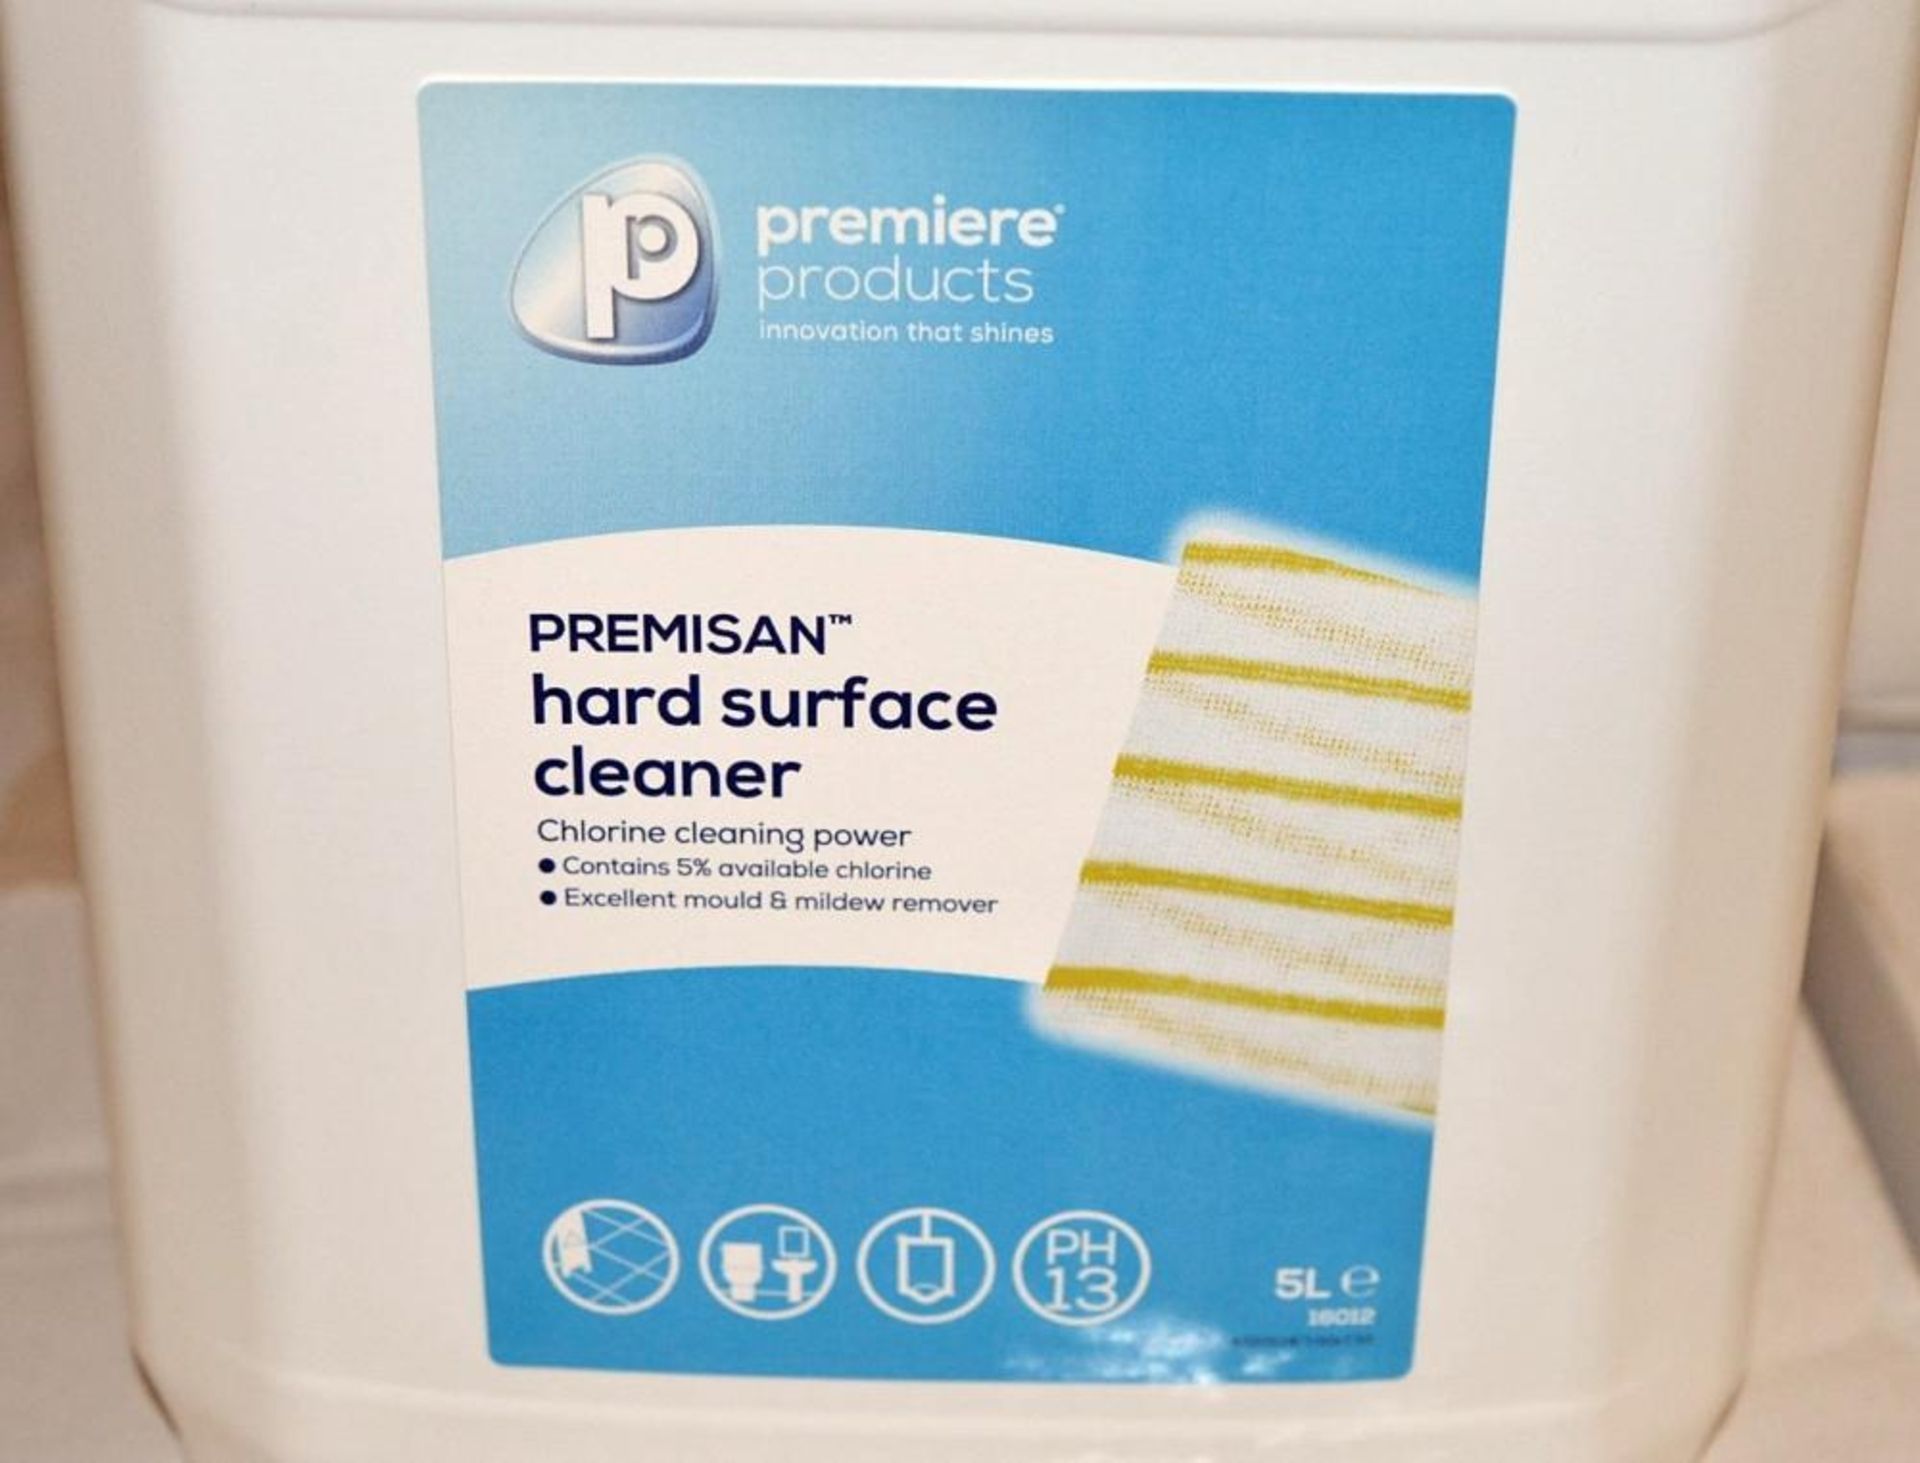 10 x Premiere Products Hard Surface Cleaner - A Professional Mould & Mildew Remover With Chlorine - Image 2 of 5